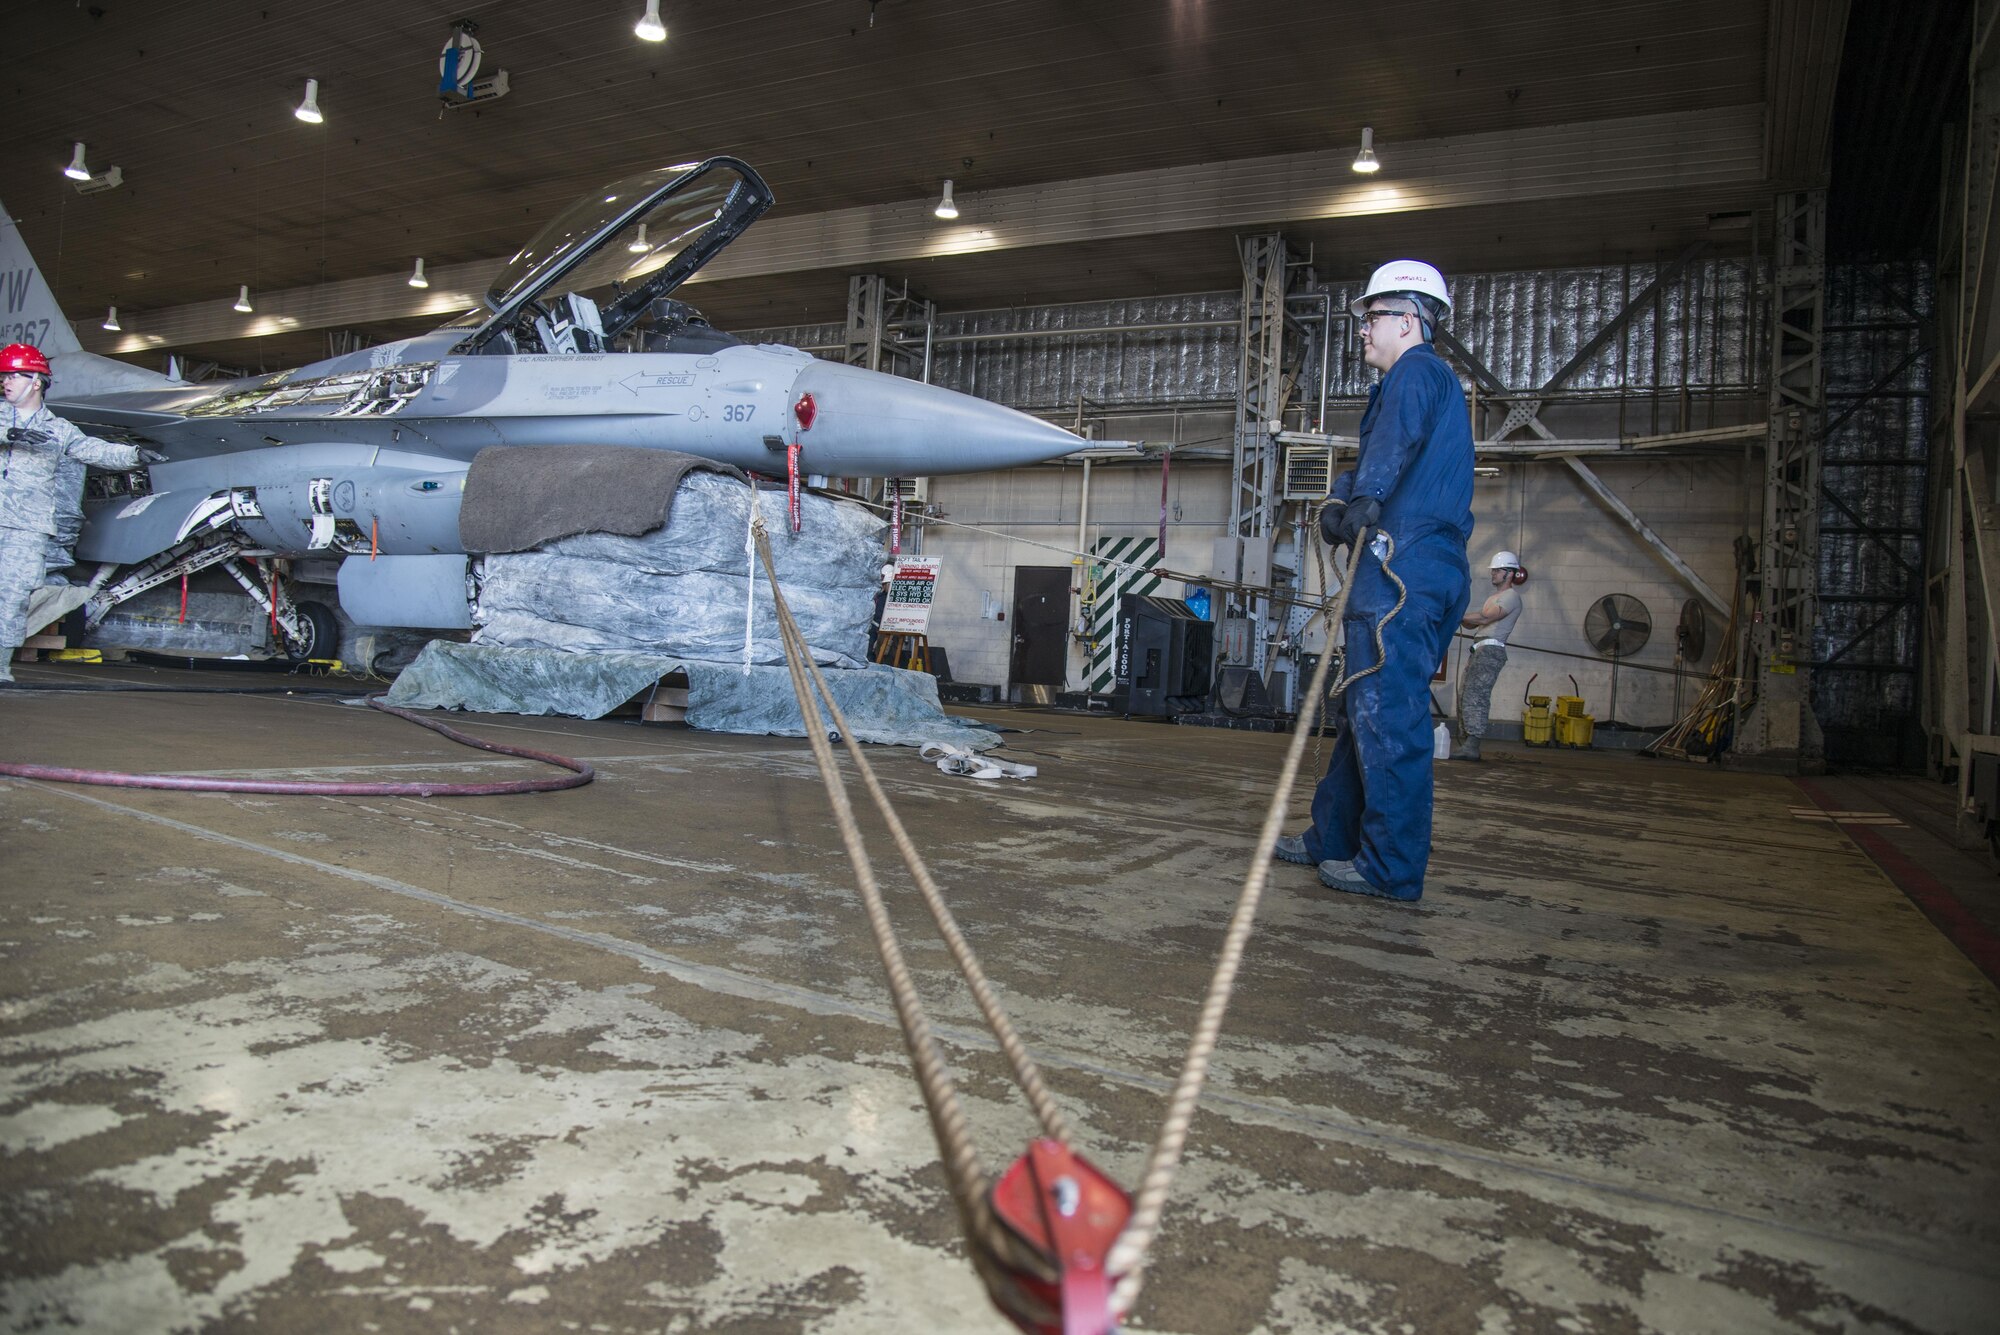 Airmen with the 35th Maintenance Squadron crashed, damaged, disabled aircraft recovery unit stabilize an F-16 Fighting Falcon at Misawa Air Base, Japan, Jan. 28, 2017. Airmen assigned to the unit participate in annual CDDAR training, giving them scenarios to hone their skill in case of a real-world incident. (U.S. Air Force photo by Senior Airman Brittany A. Chase)